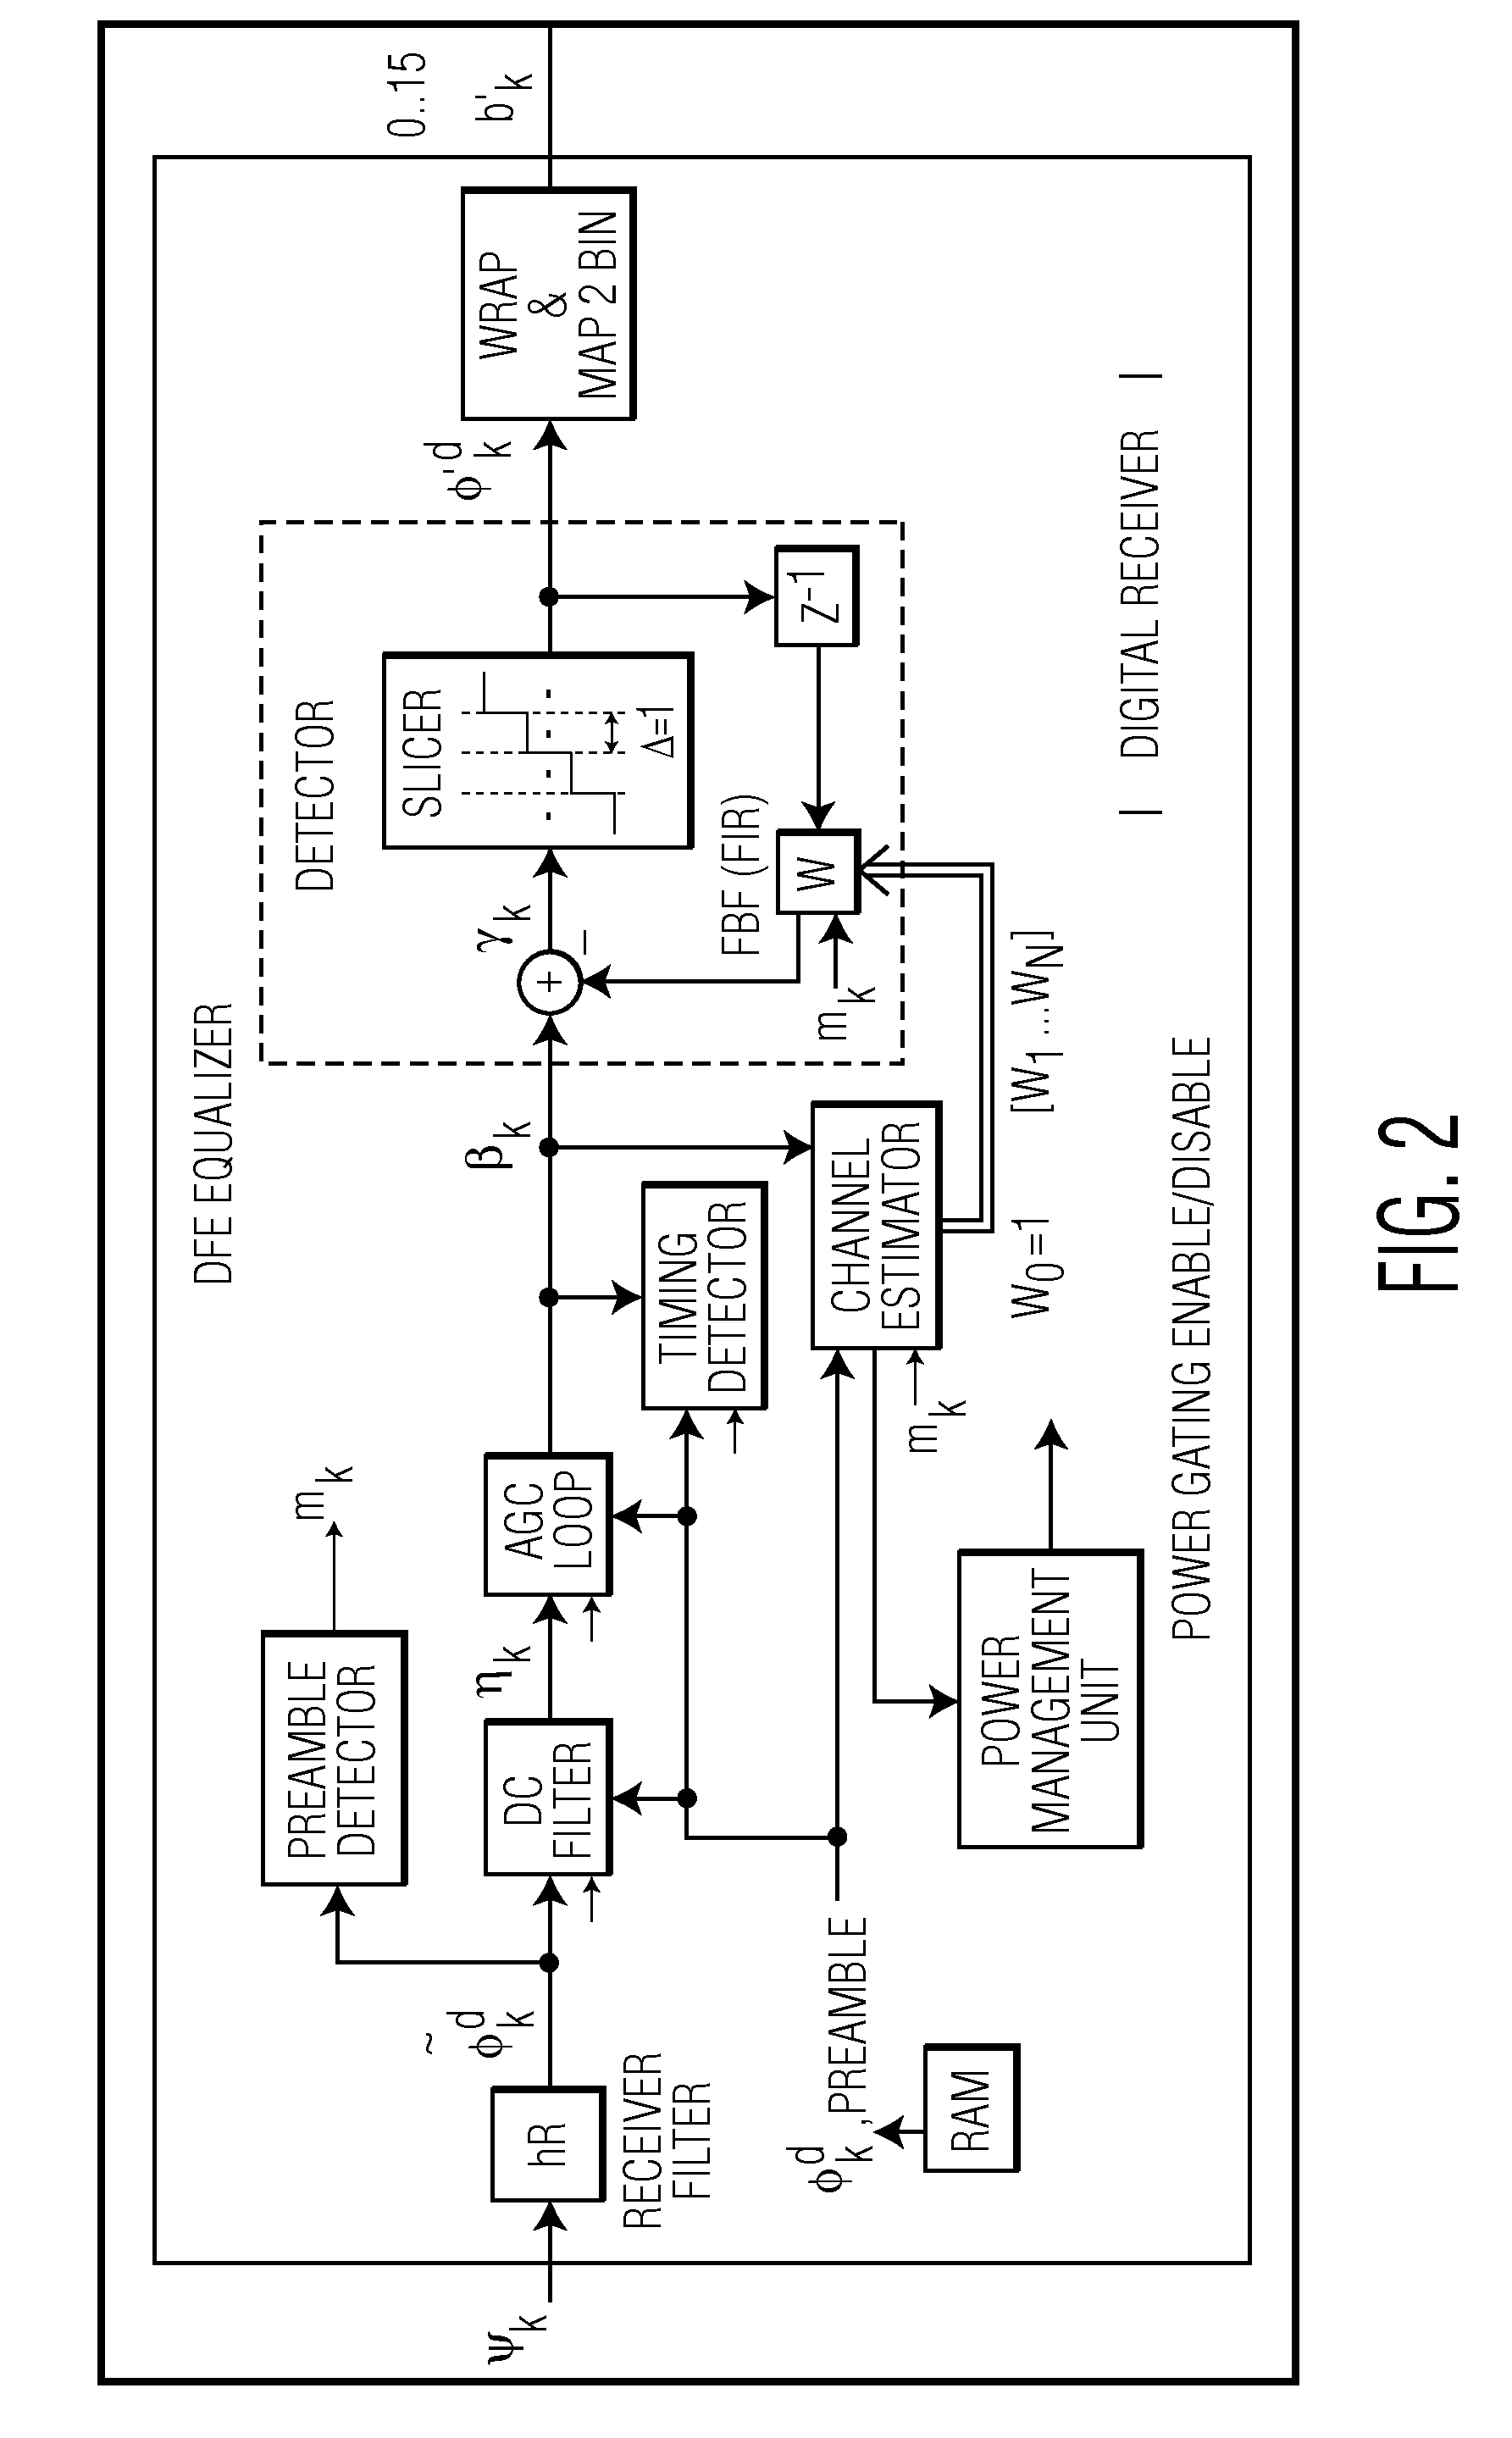 Smart card with reconfigurable receiver